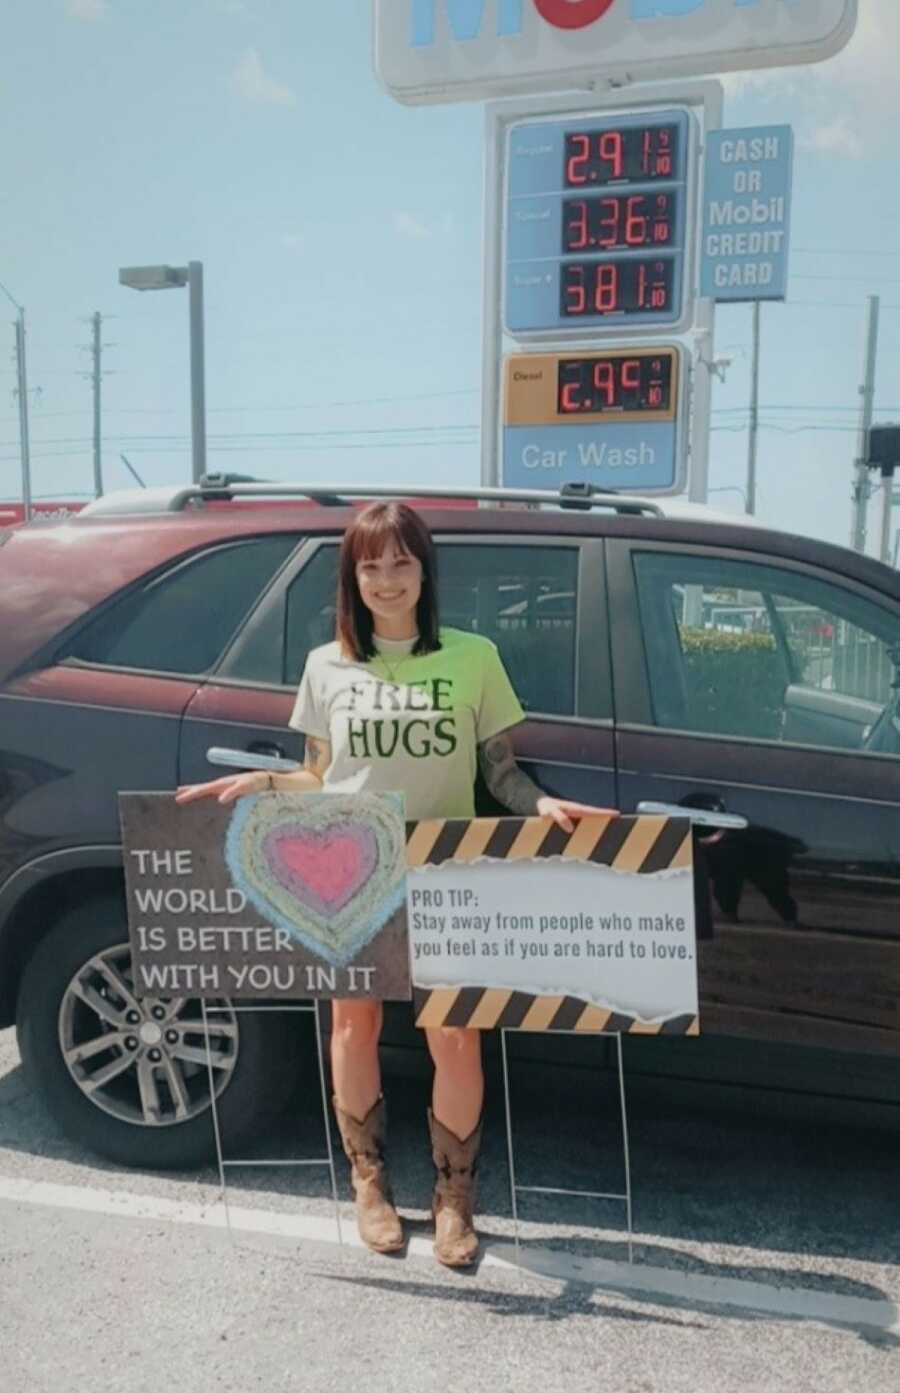 suicide attempt survivor wearing green shirt standing with two mental health signs